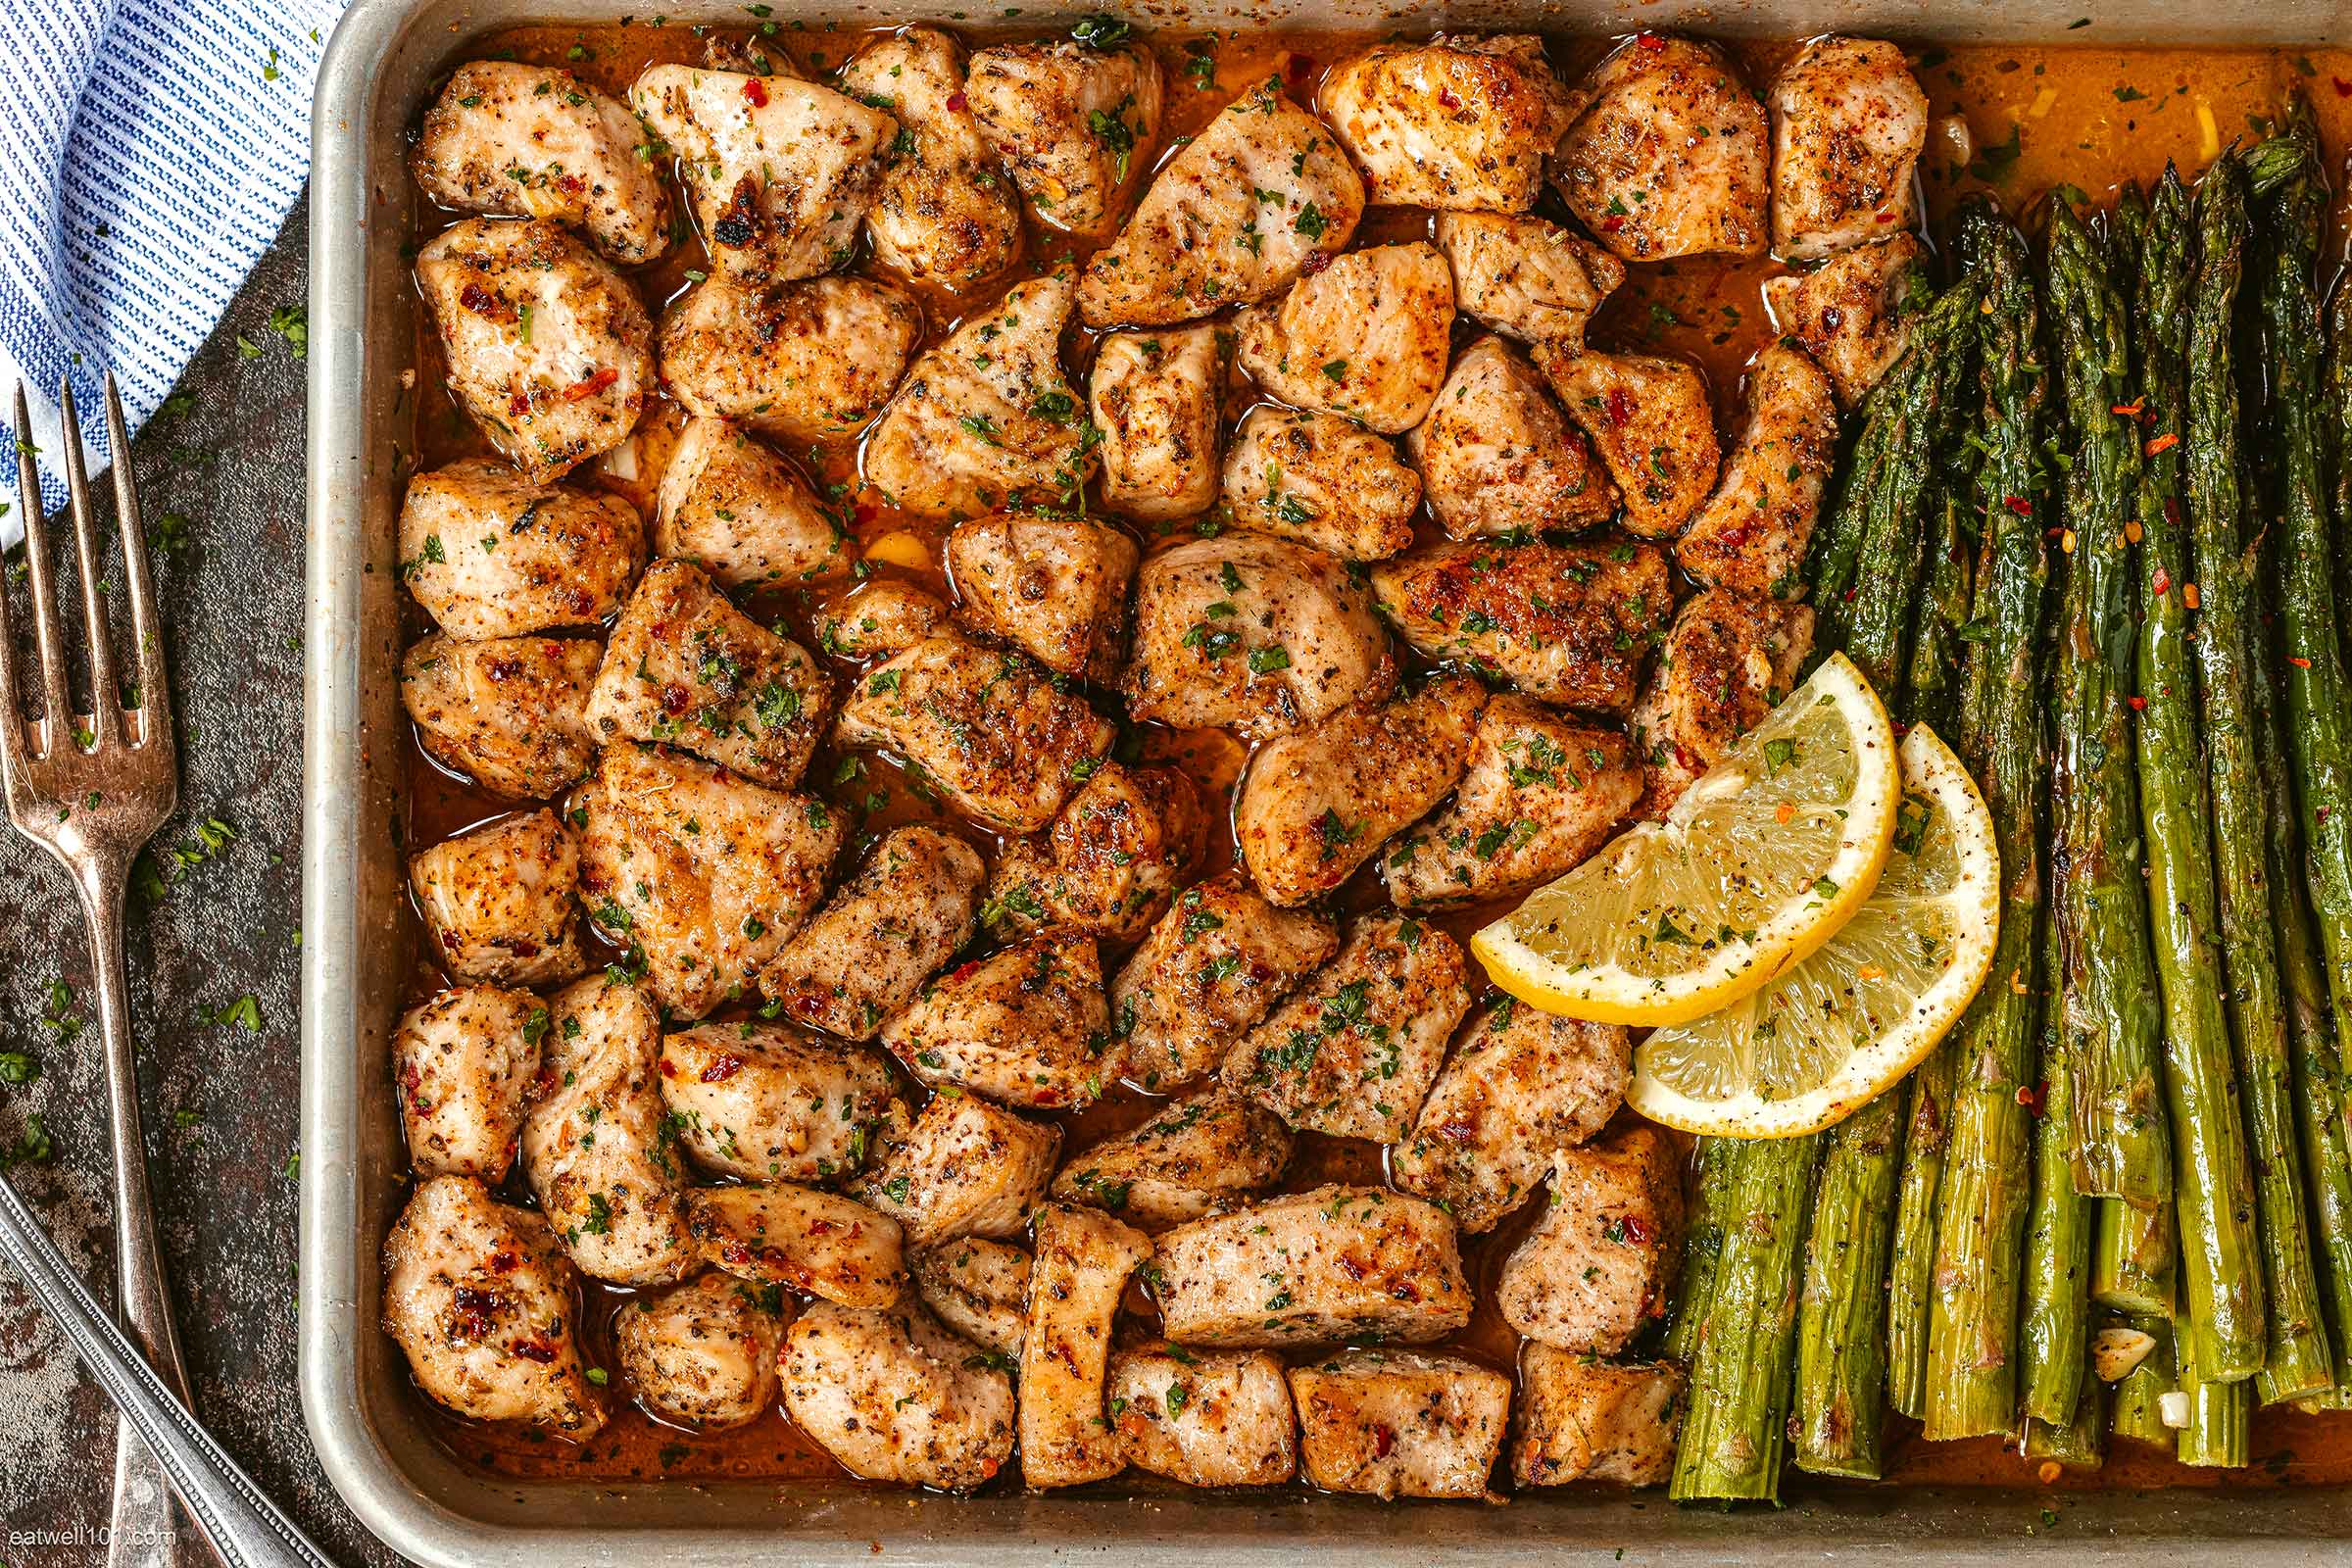 Lemon Garlic Butter Chicken Baked with Asparagus